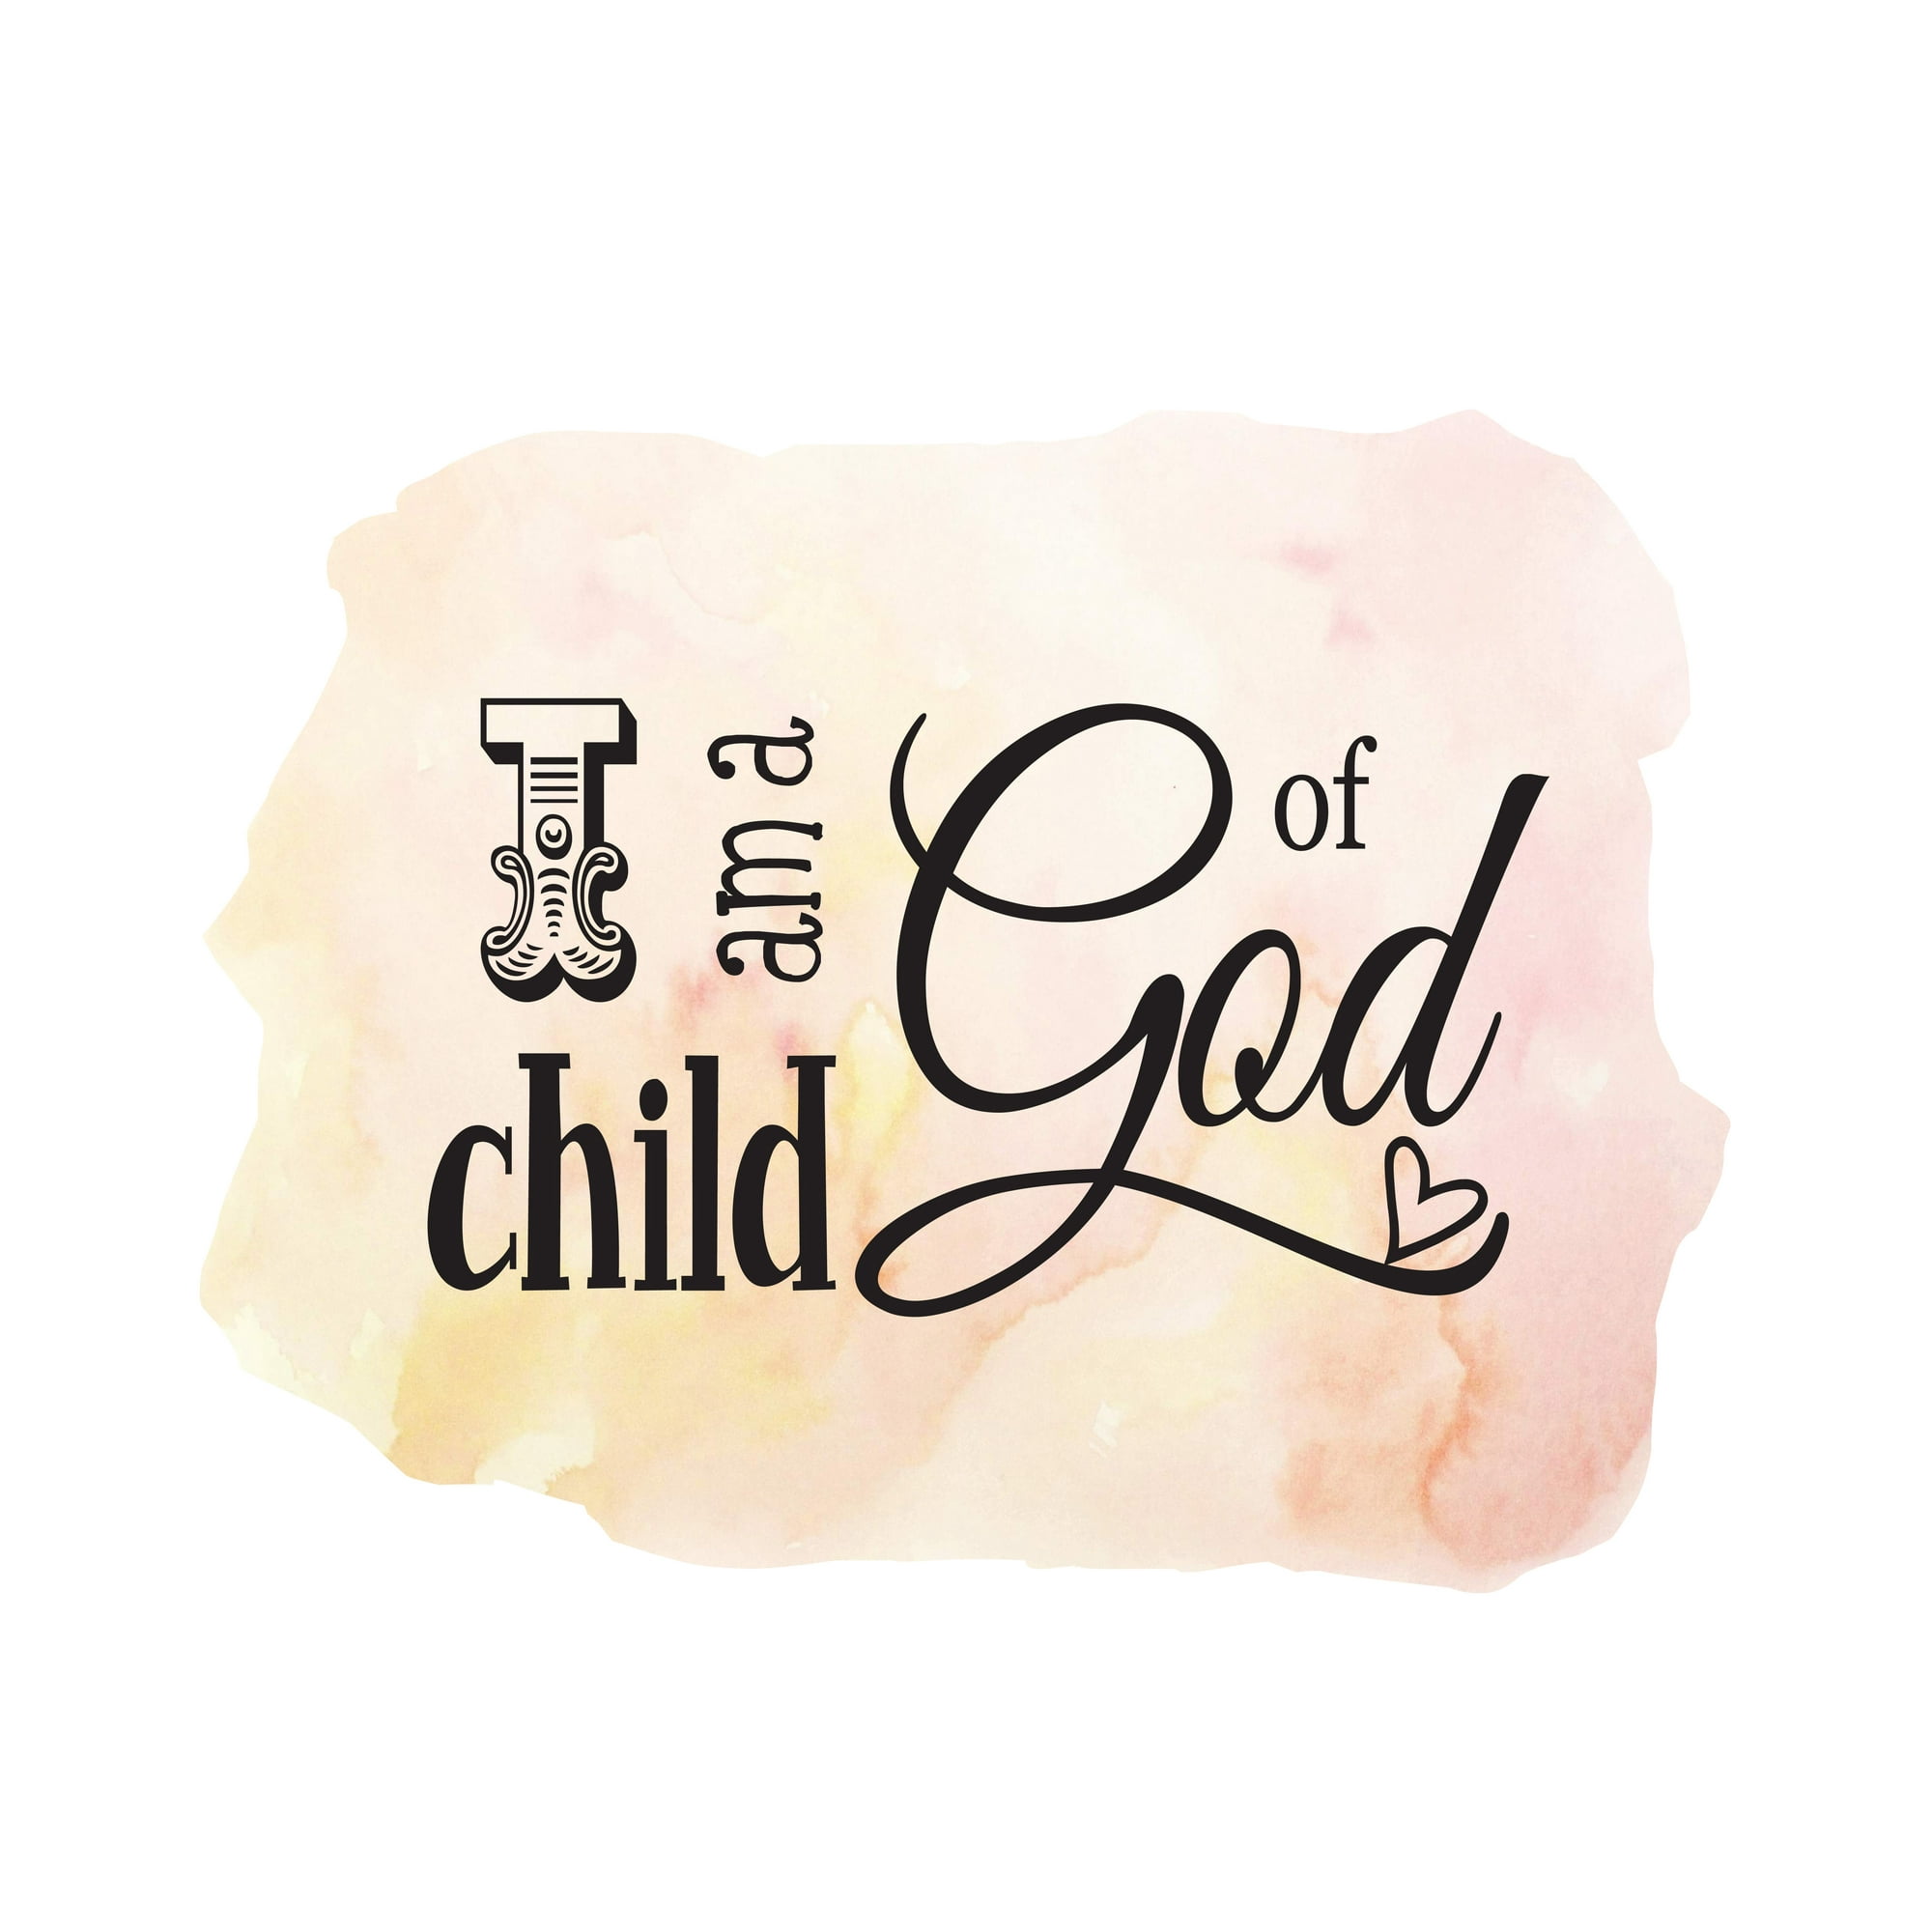 QUOTES - I Am A Child Of God - Adhesive Vinyl Home Living Room ...